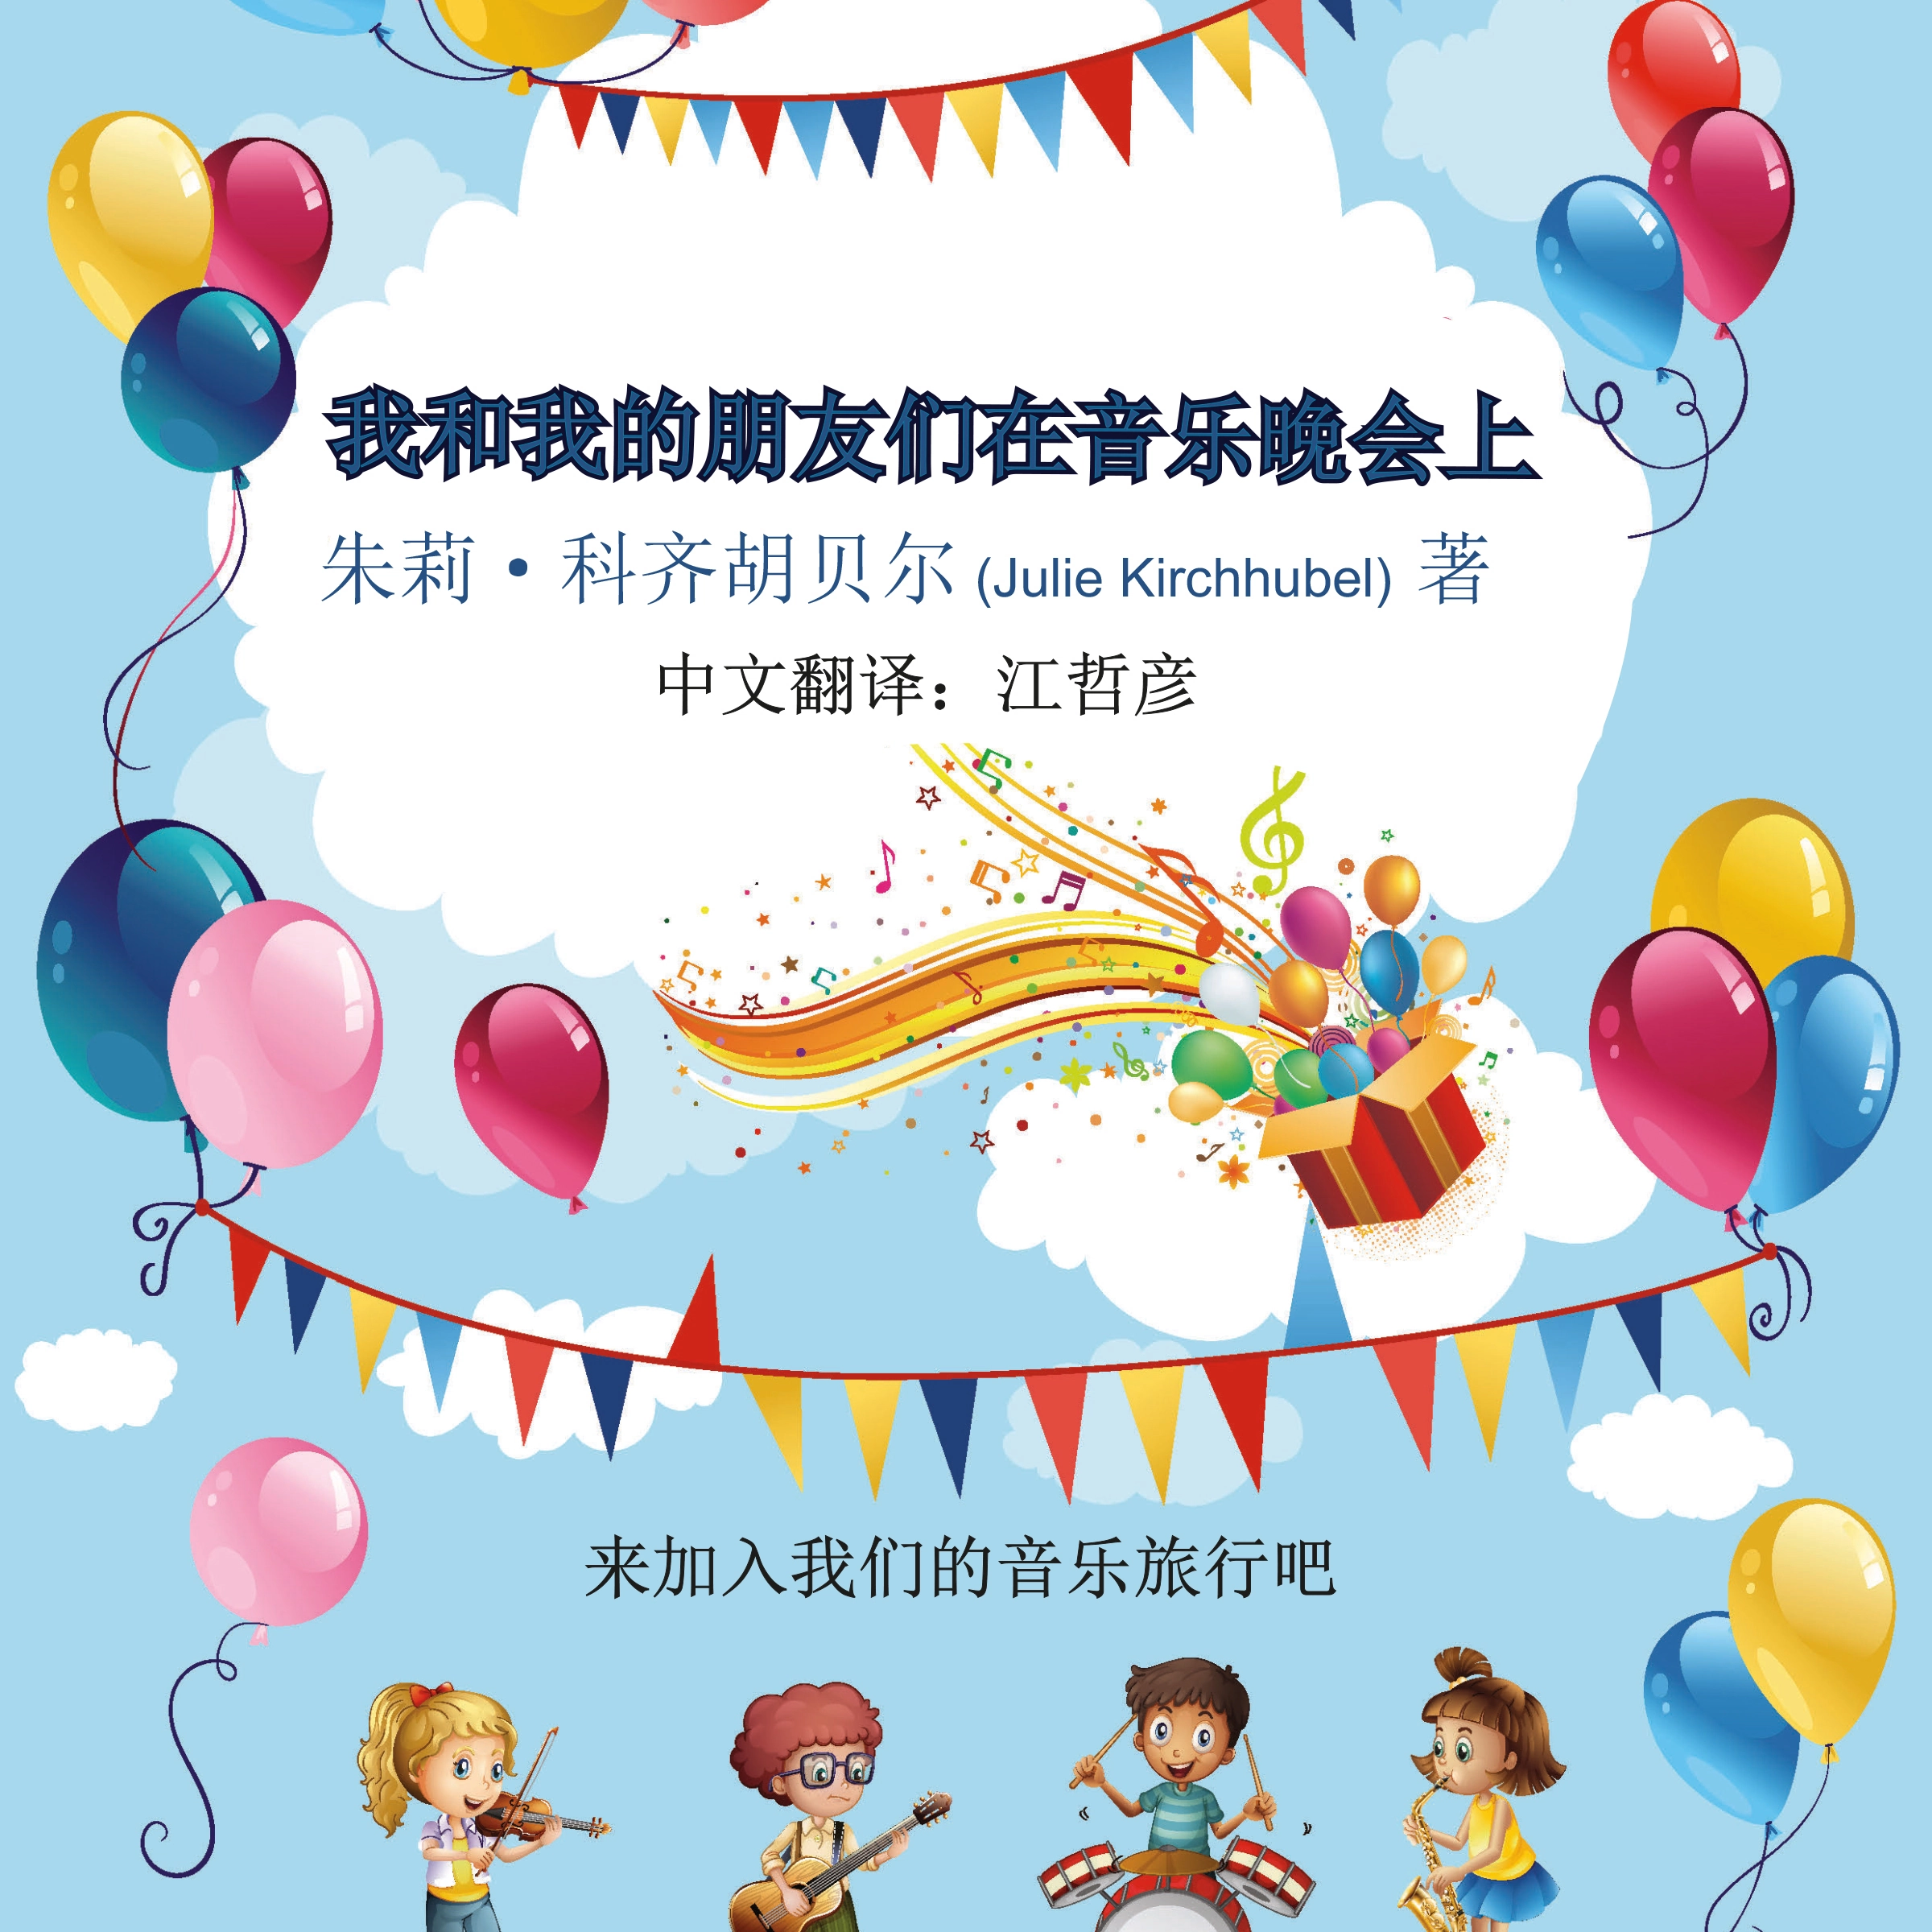 Me And My Friends At The Musical Party - Chinese Audiobook by Julie Kirchhubel